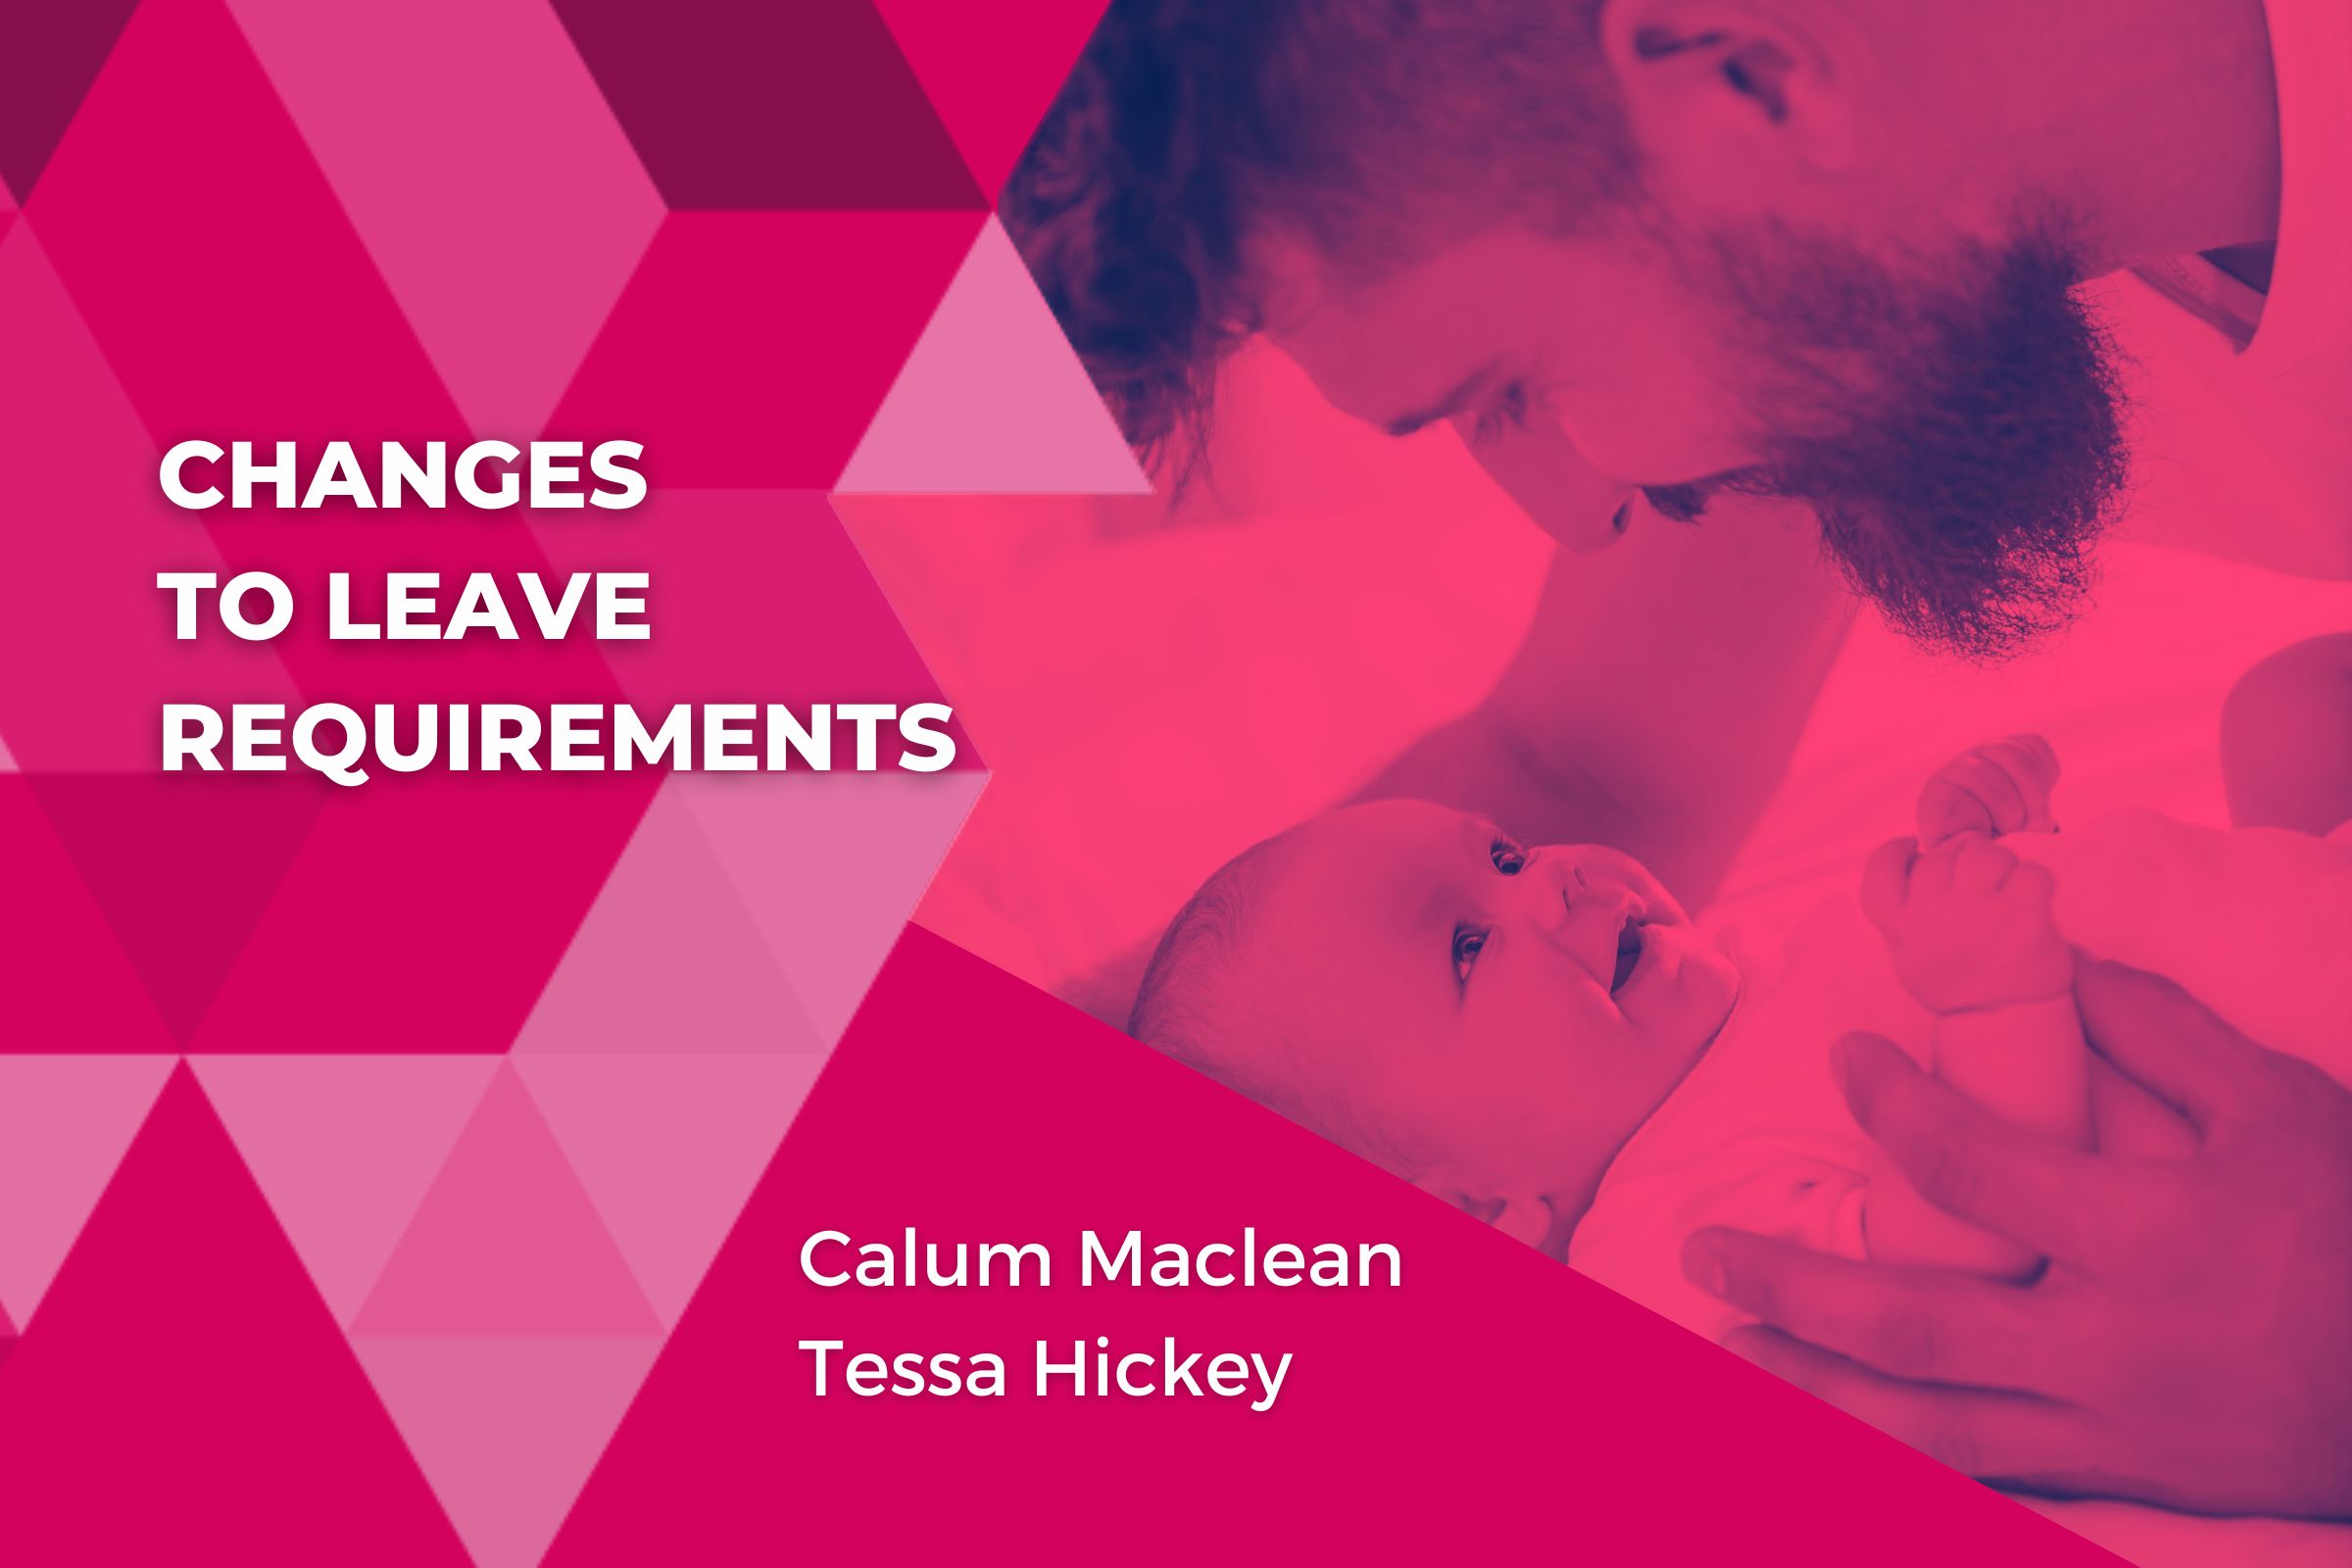 Changes to Leave Requirements